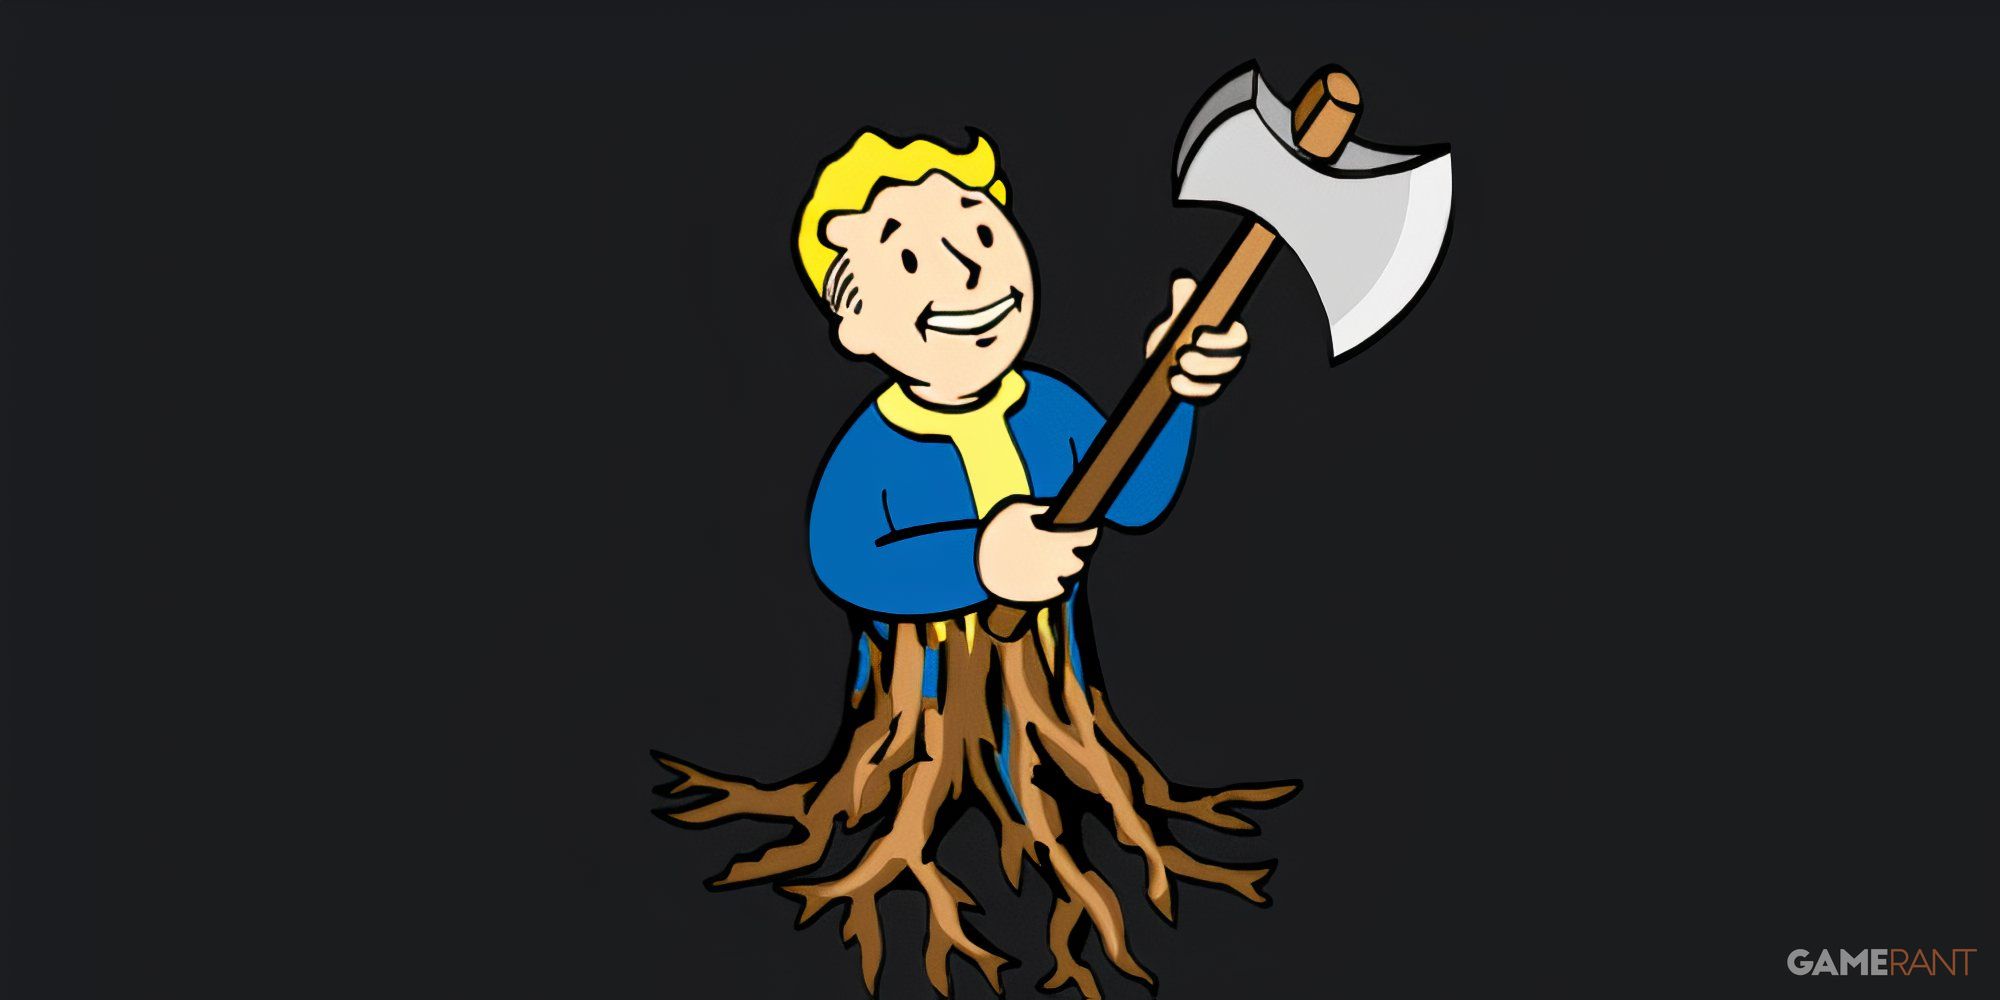 Vault Boy's bottom half is a tree trunk and he holds up a huge axe.